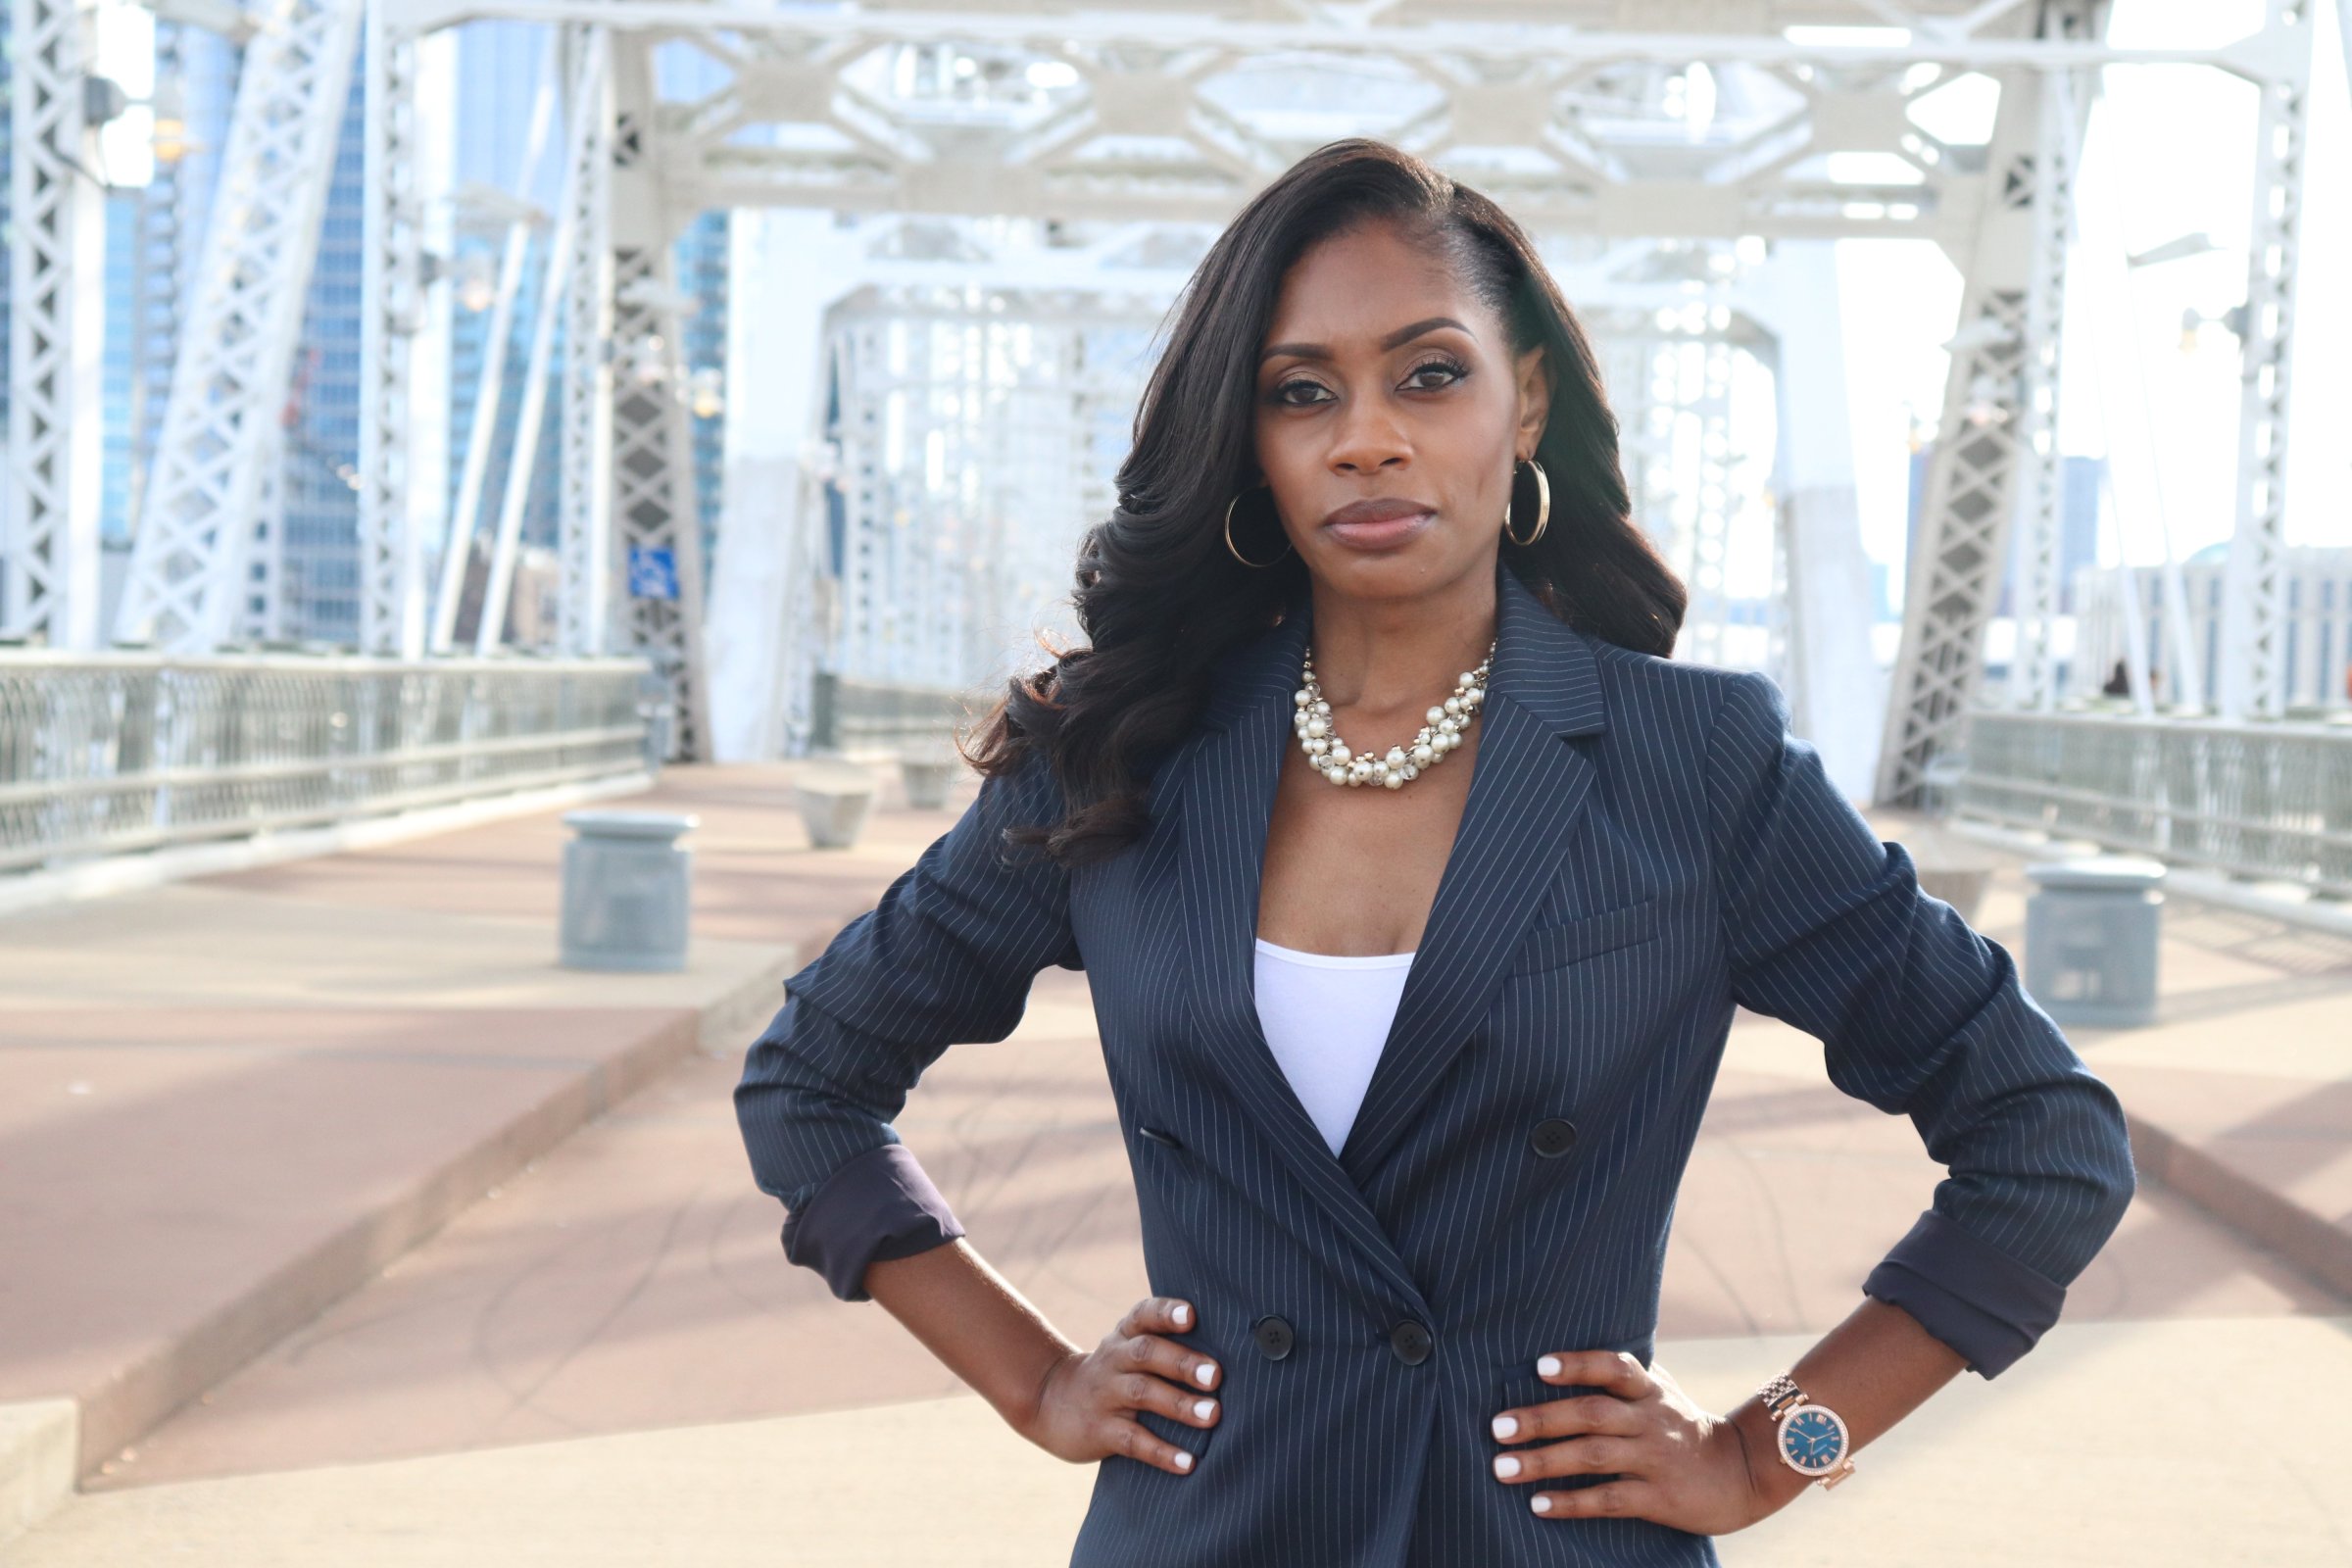 Keeda Haynes, a former Democratic congressional candidate and criminal justice advocate, has a new book out called Bending the Arc: My Journey from Prison to Politics